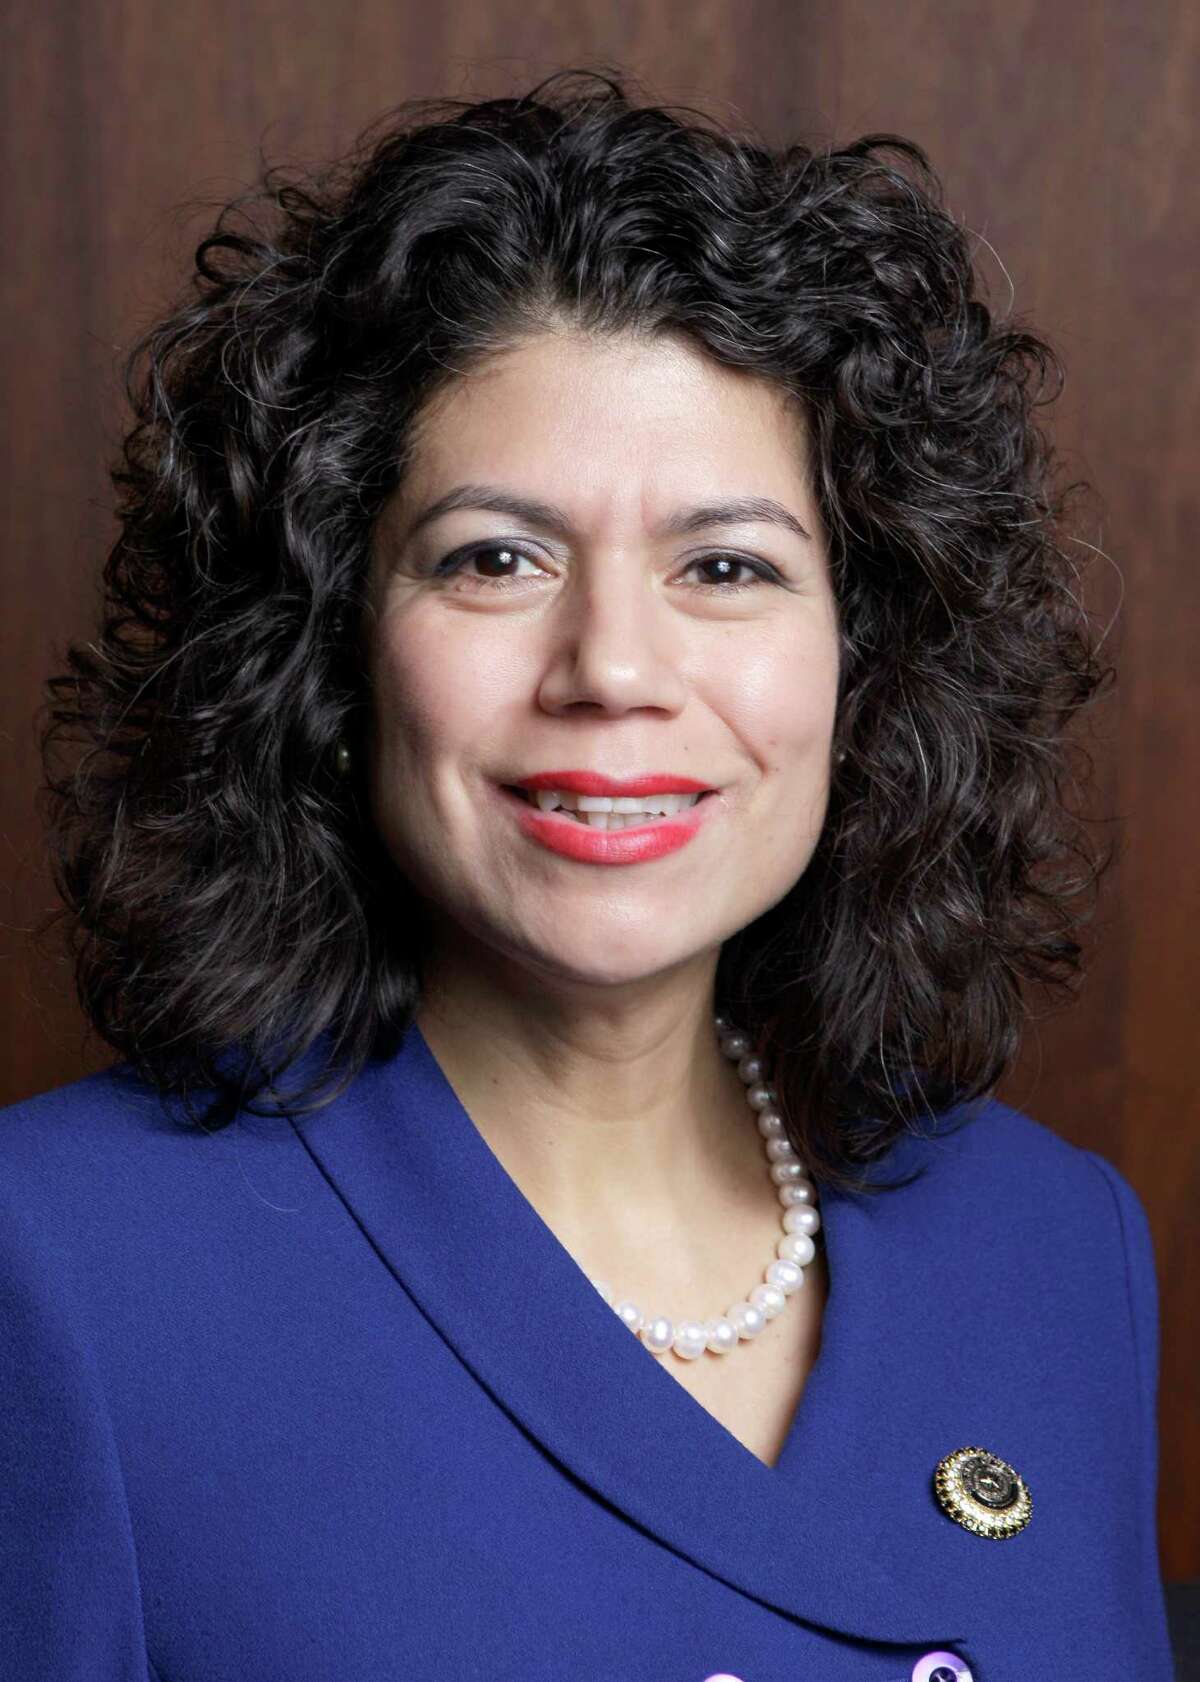 CAROL ALVARADO The former Houston City Council member has represented Texas House District 145 since 2008, and says her experience would give her an edge in the Senate.